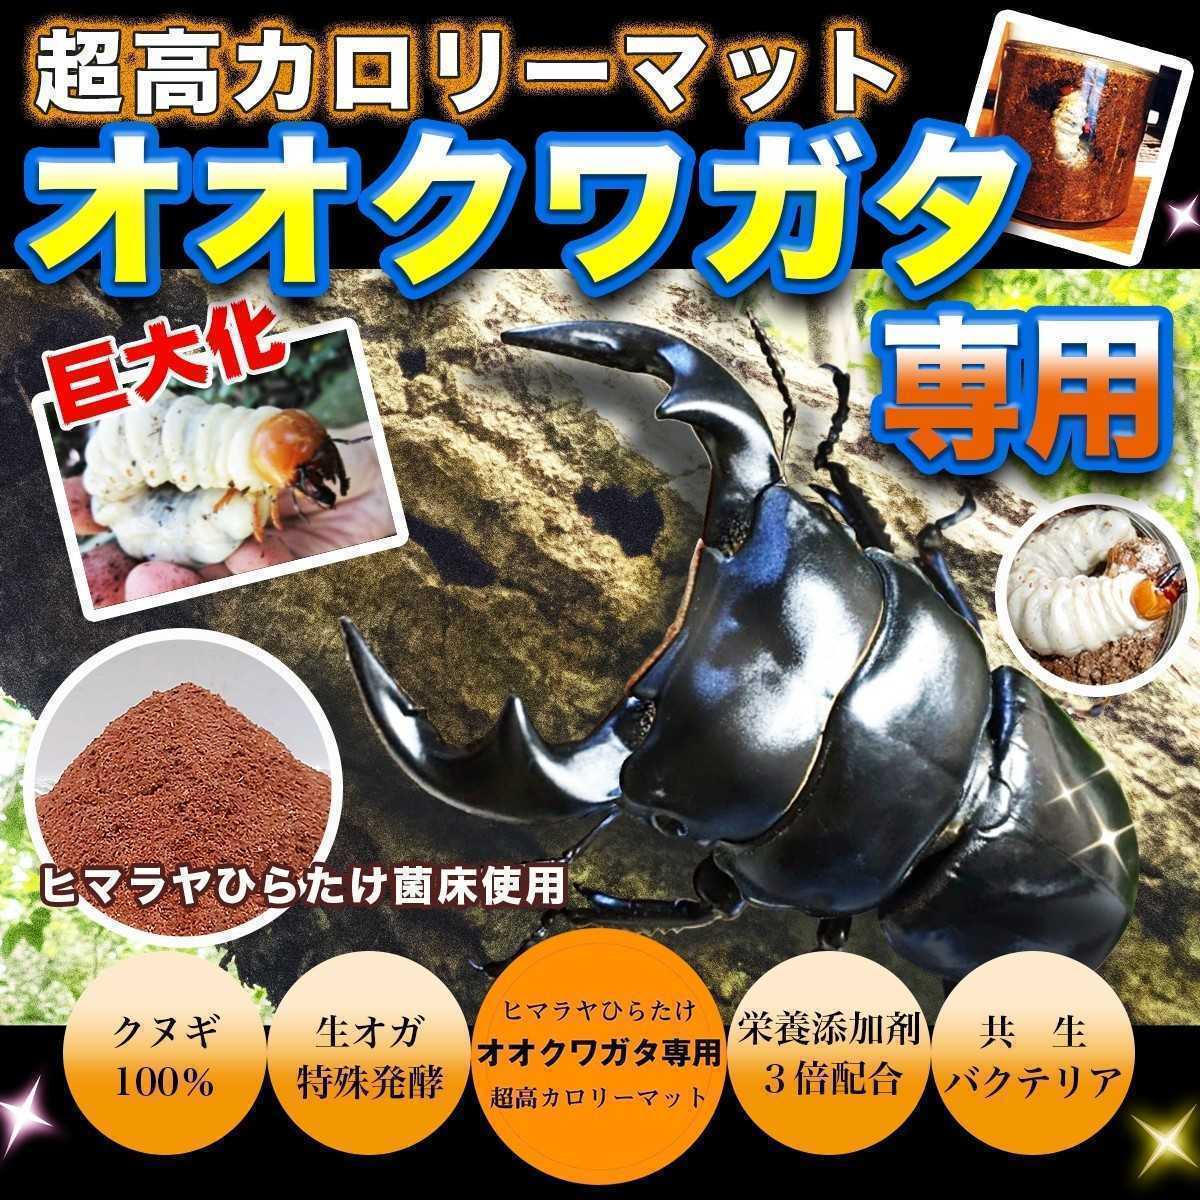  oo stag beetle exclusive use * super height calorie mat * raw oga. special departure .! symbiosis bacteria * special amino acid etc. nutrition addition agent .3 times combination * sawtooth oak, 100% feedstocks!